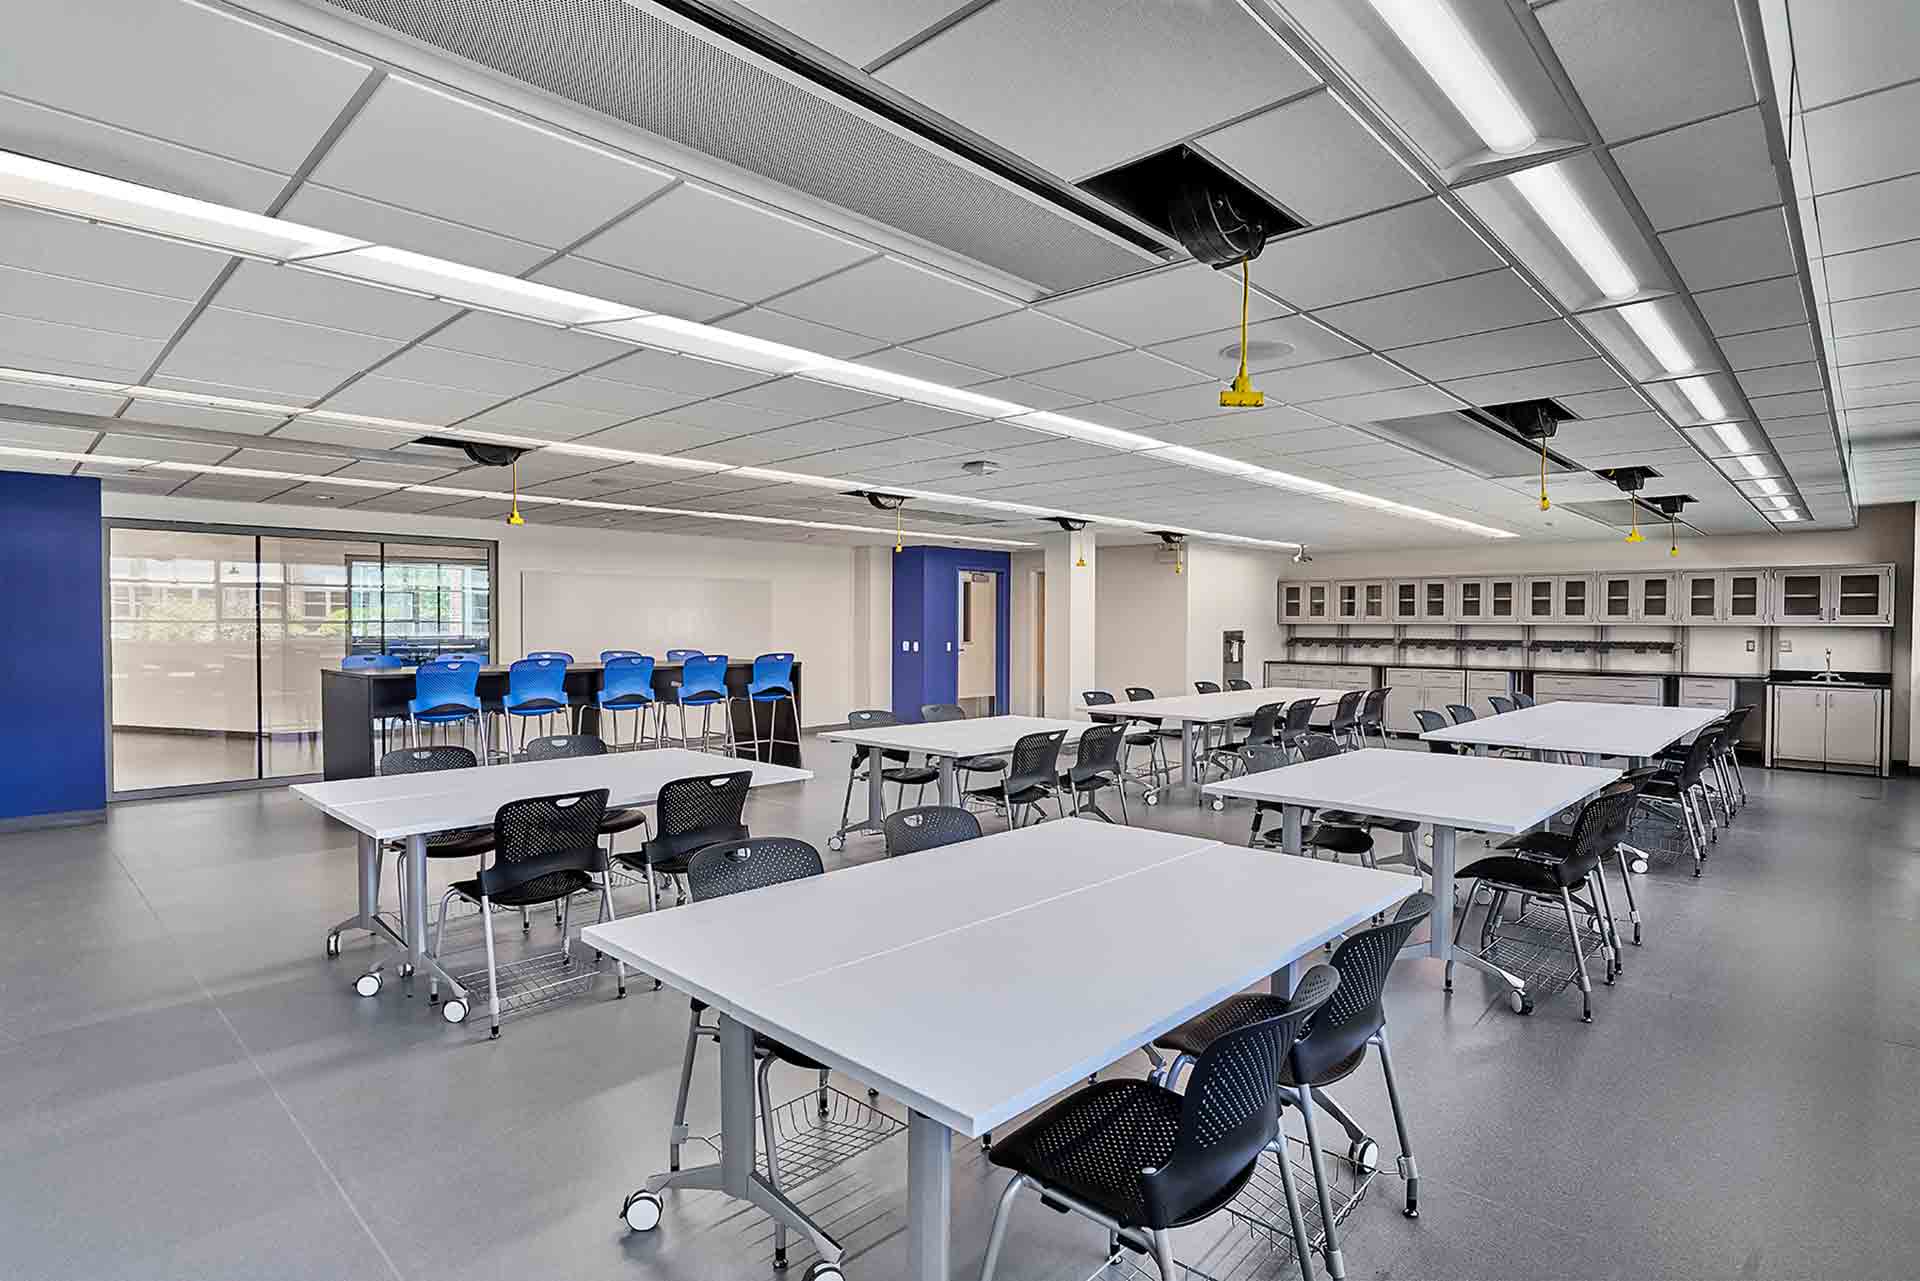 faith-in-the-future-campaign-classroom-with-blue-and-black-chairs